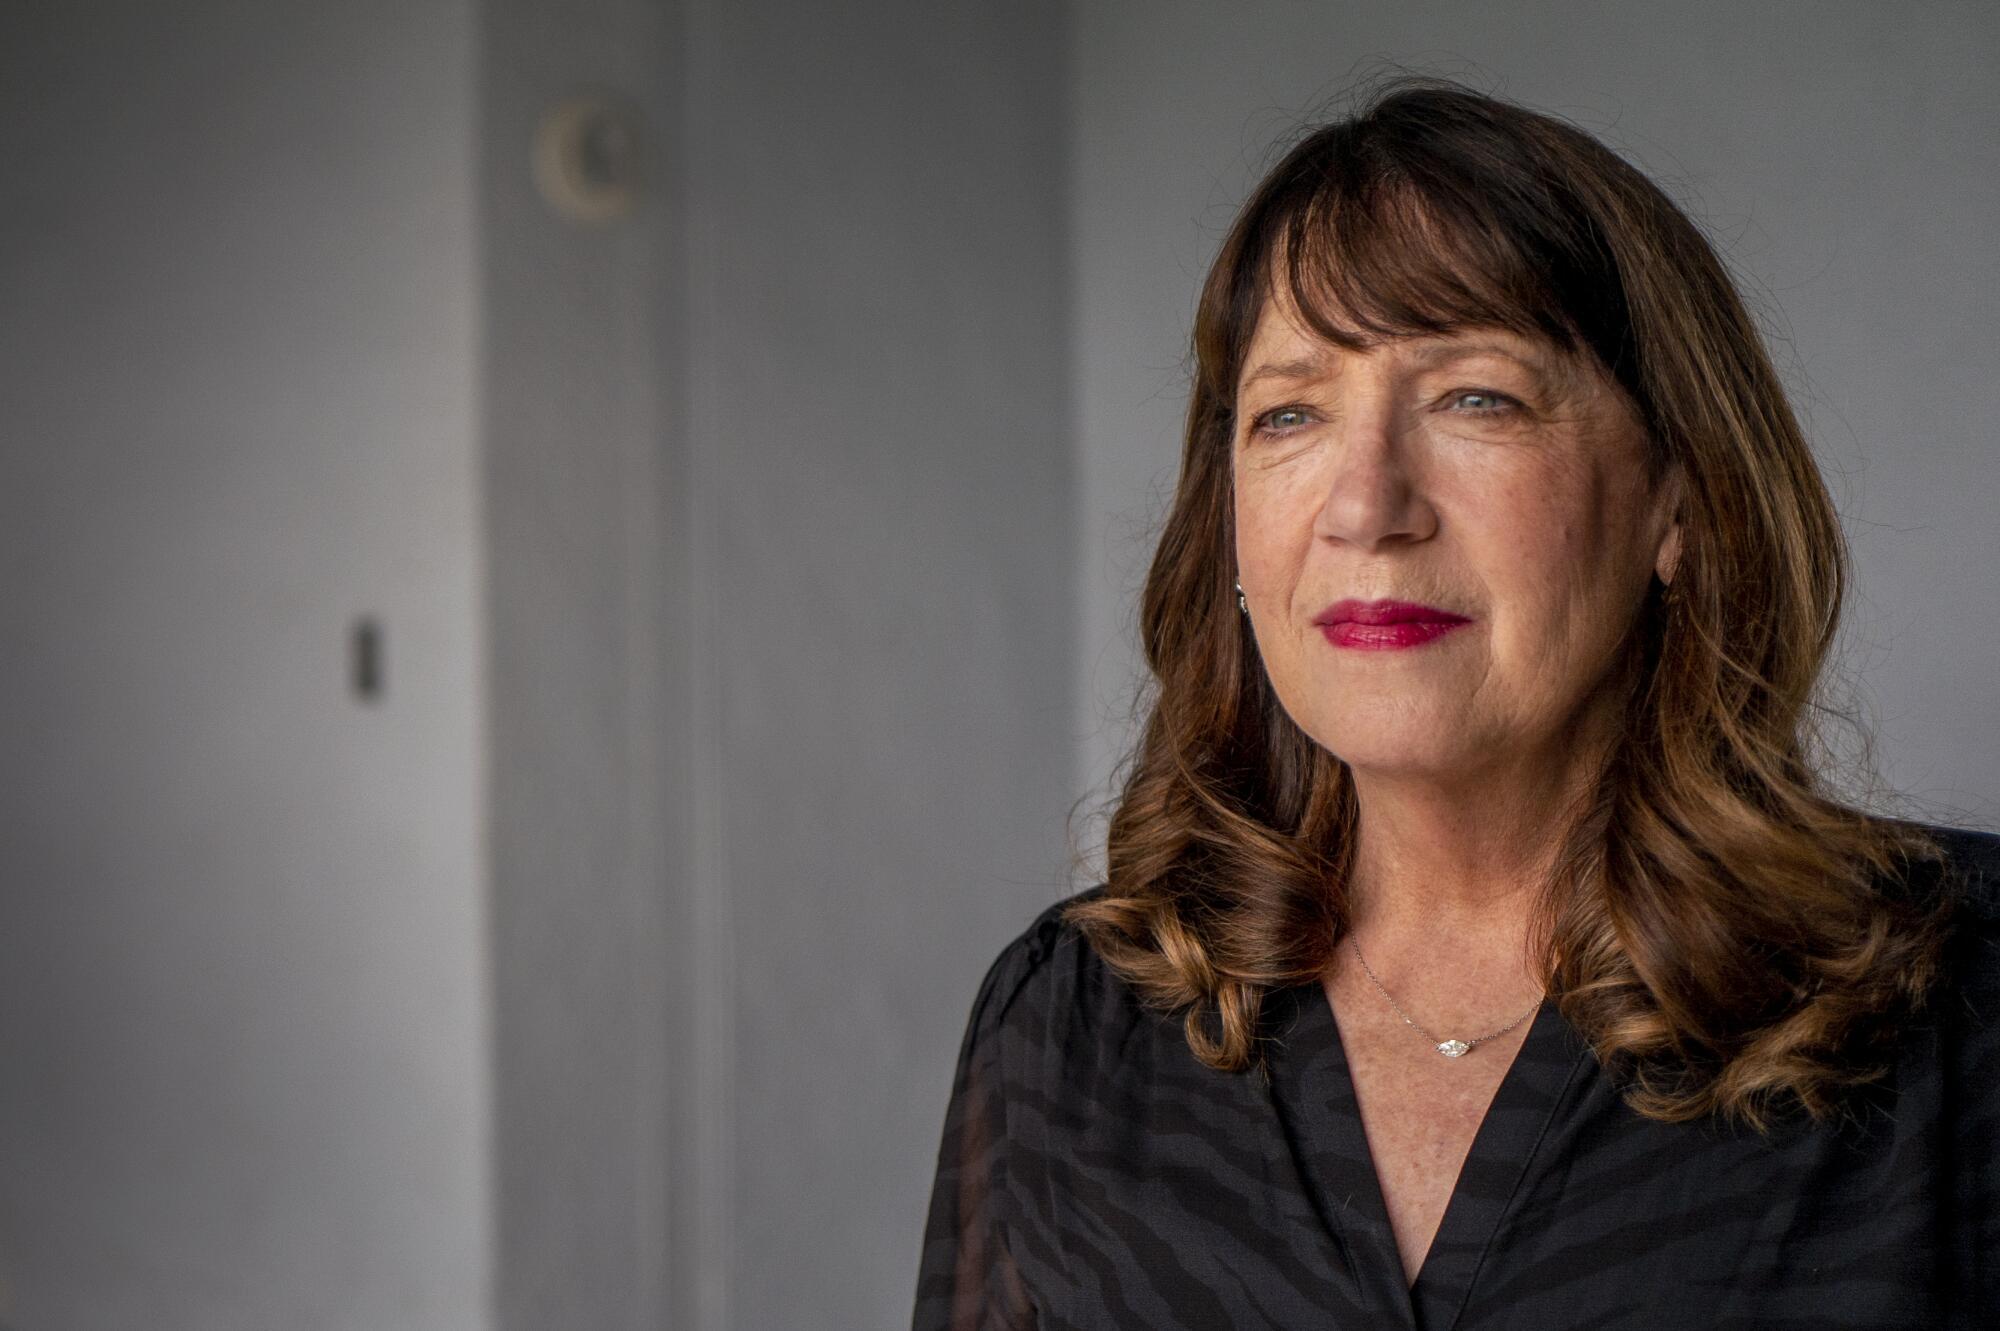 Ann Dowd won an Emmy for her role as Aunt Lydia on Hulu's "The Handmaid's Tale."